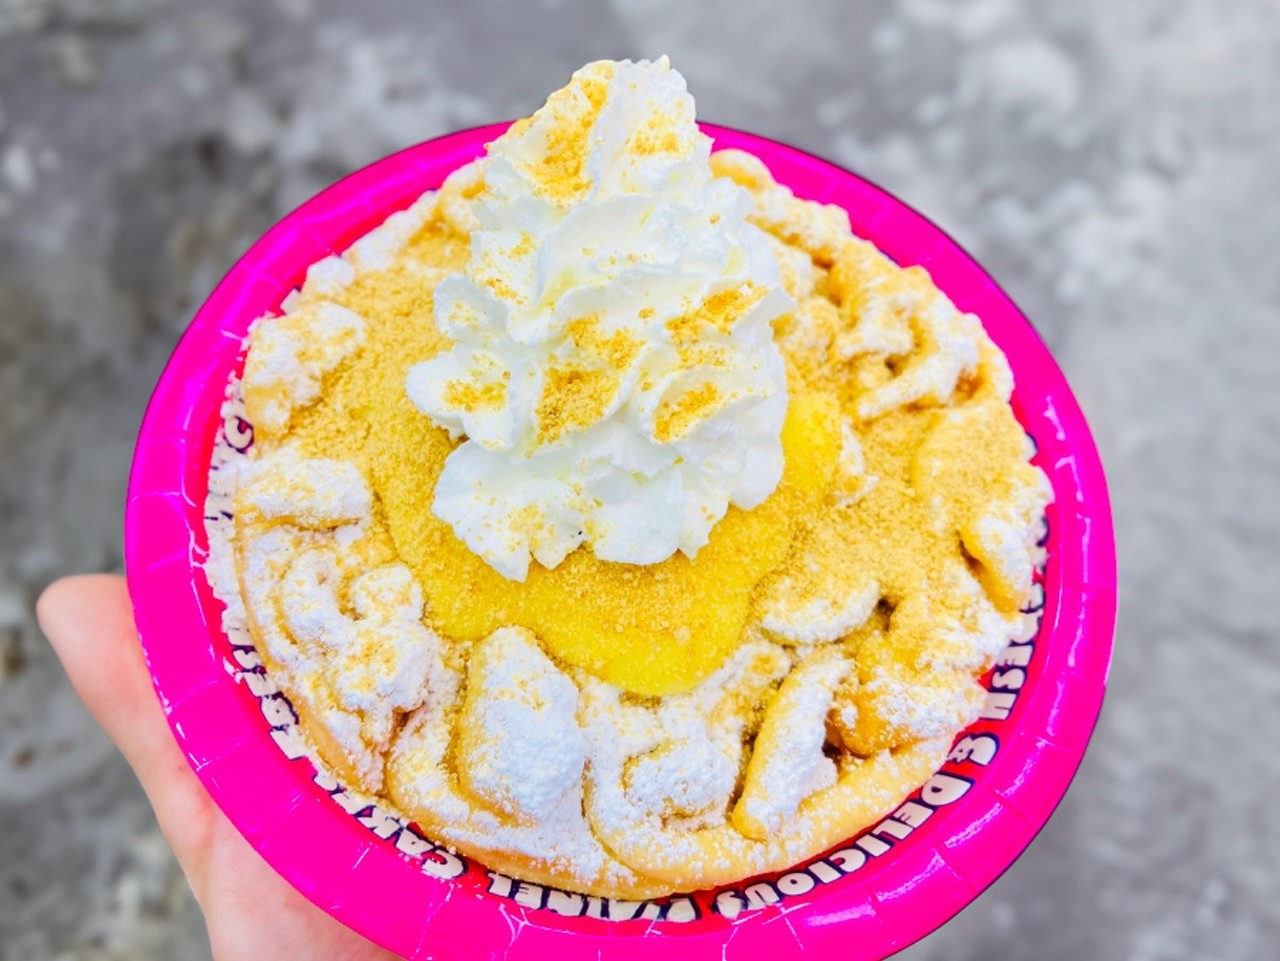 Banana Cream Pie Funnel Cake
Fresh hot funnel cake topped with banana pudding, whipped cream and graham cracker crust.
Location: Ryals Concessions Sweet Shop